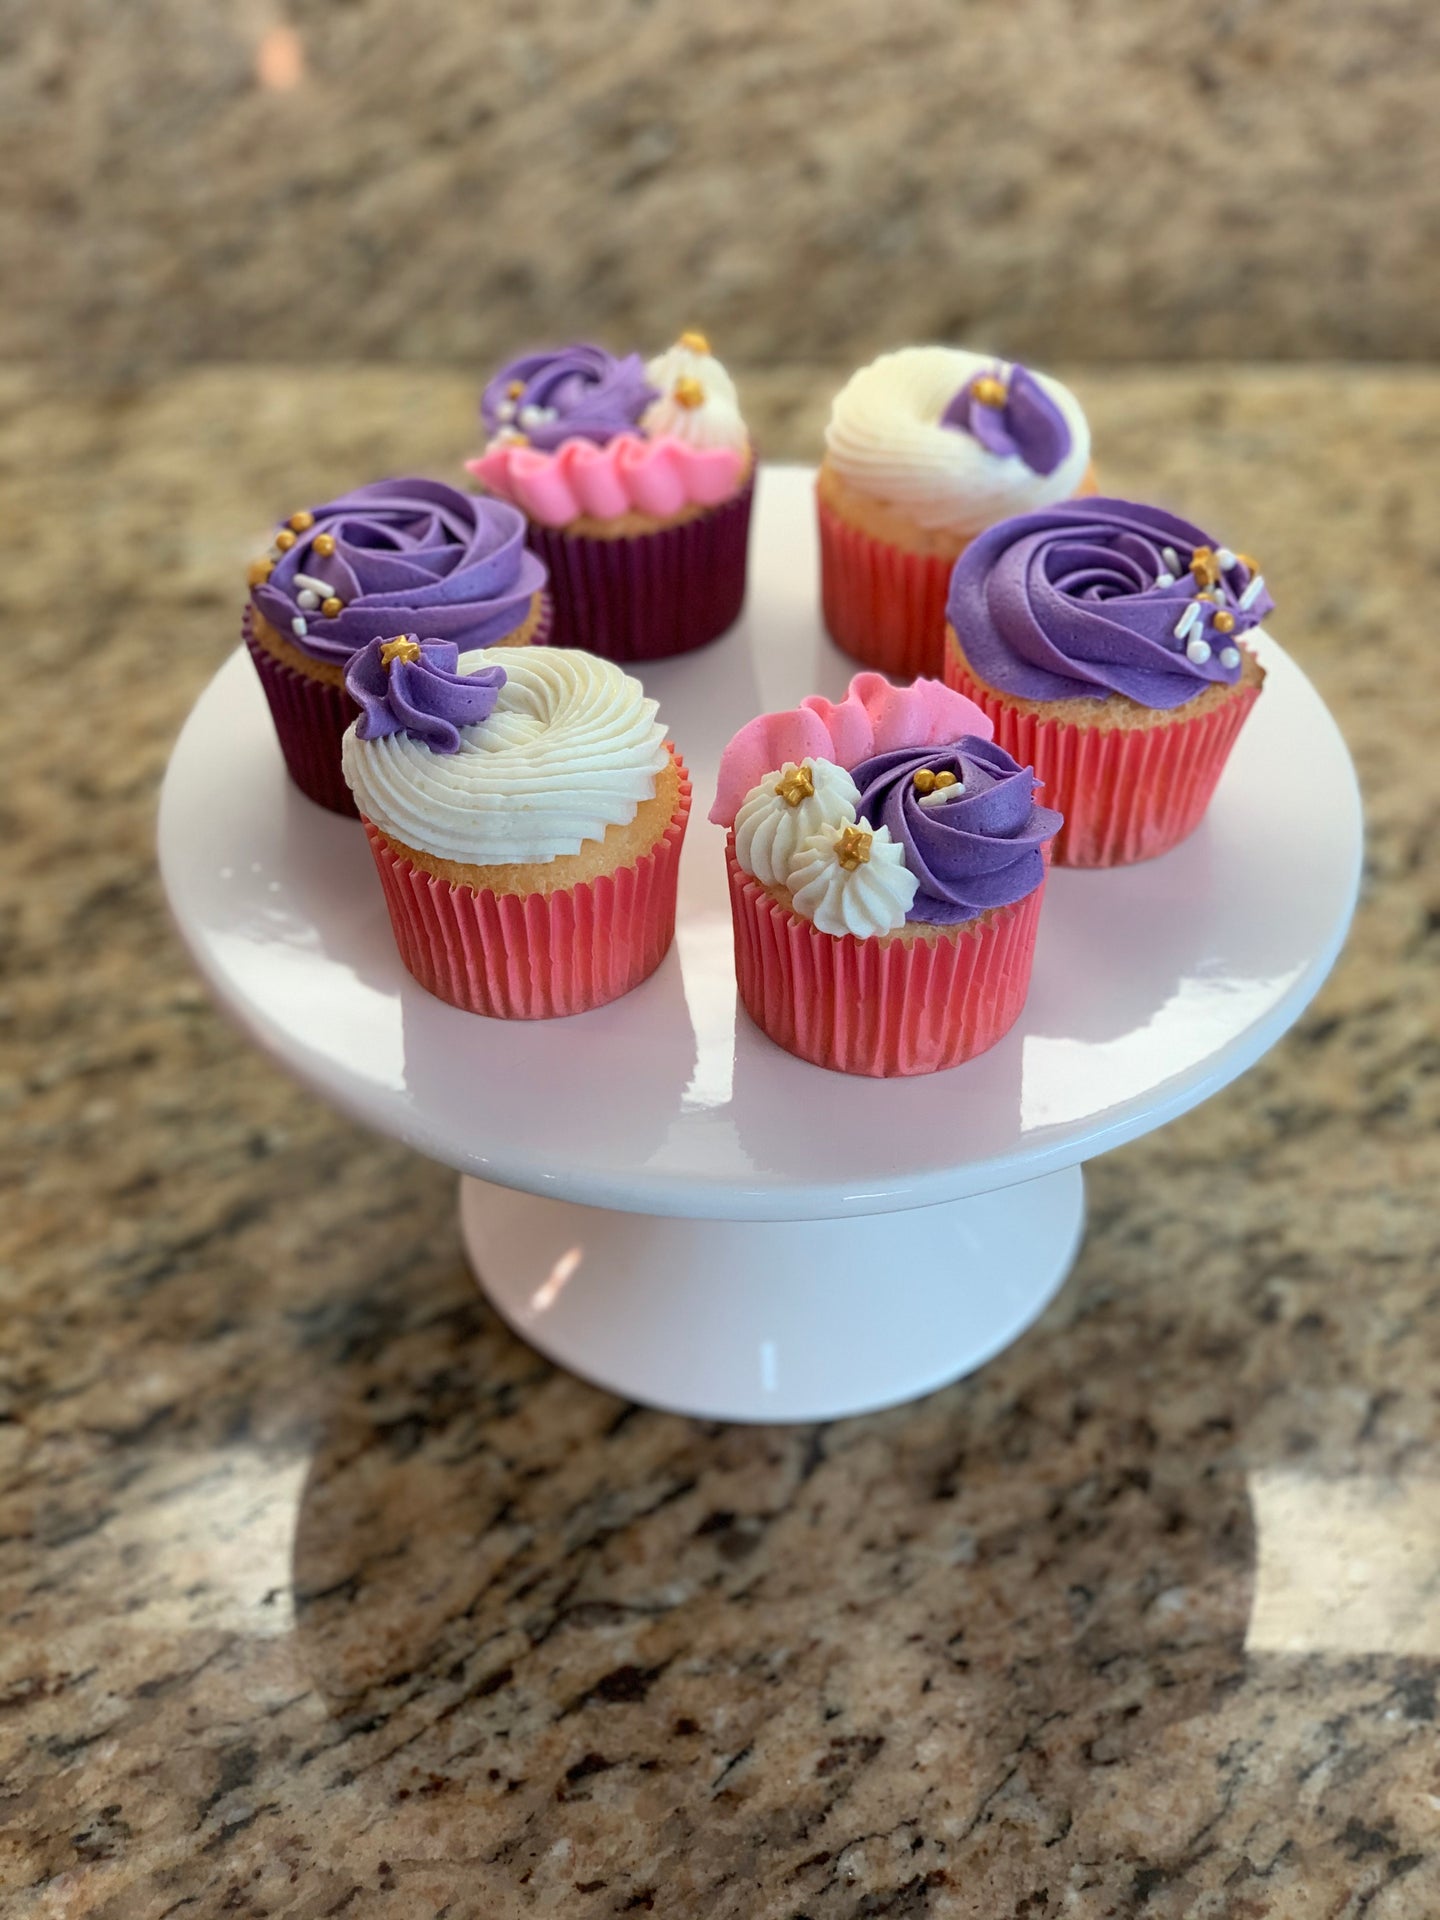 Piped Cupcakes